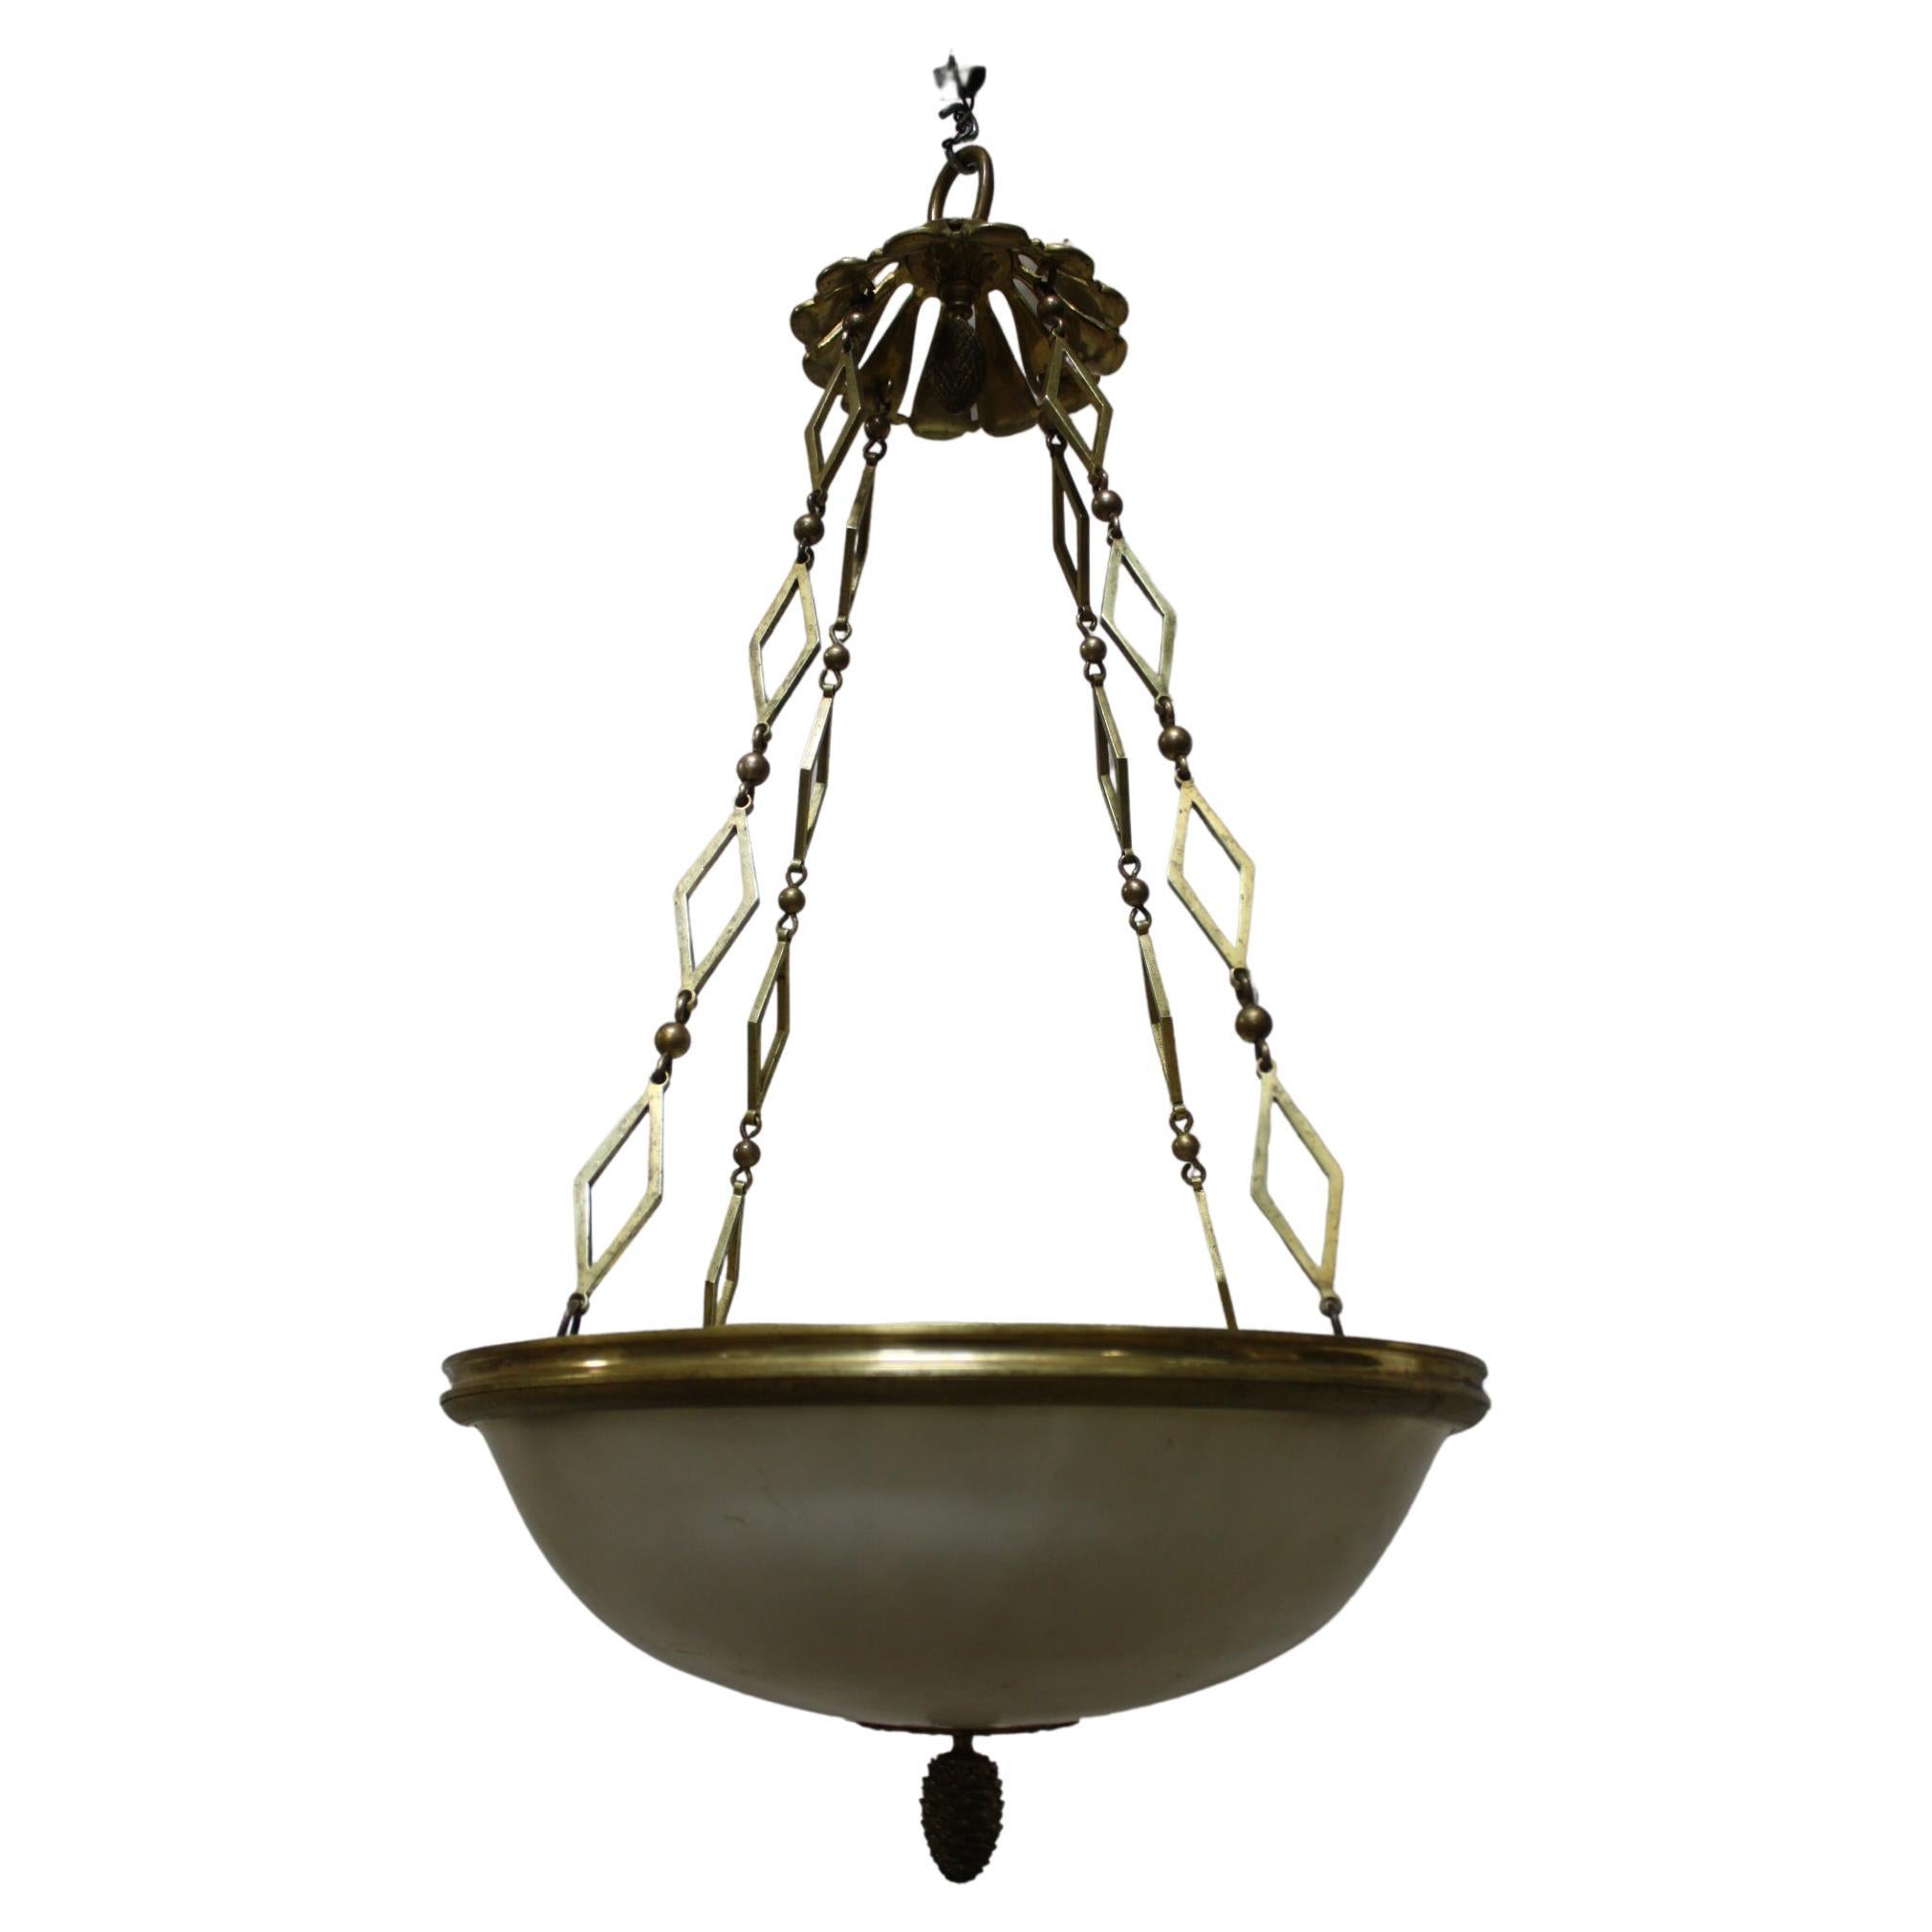 Superb chandelier in alabaster and bronze, very much quality.